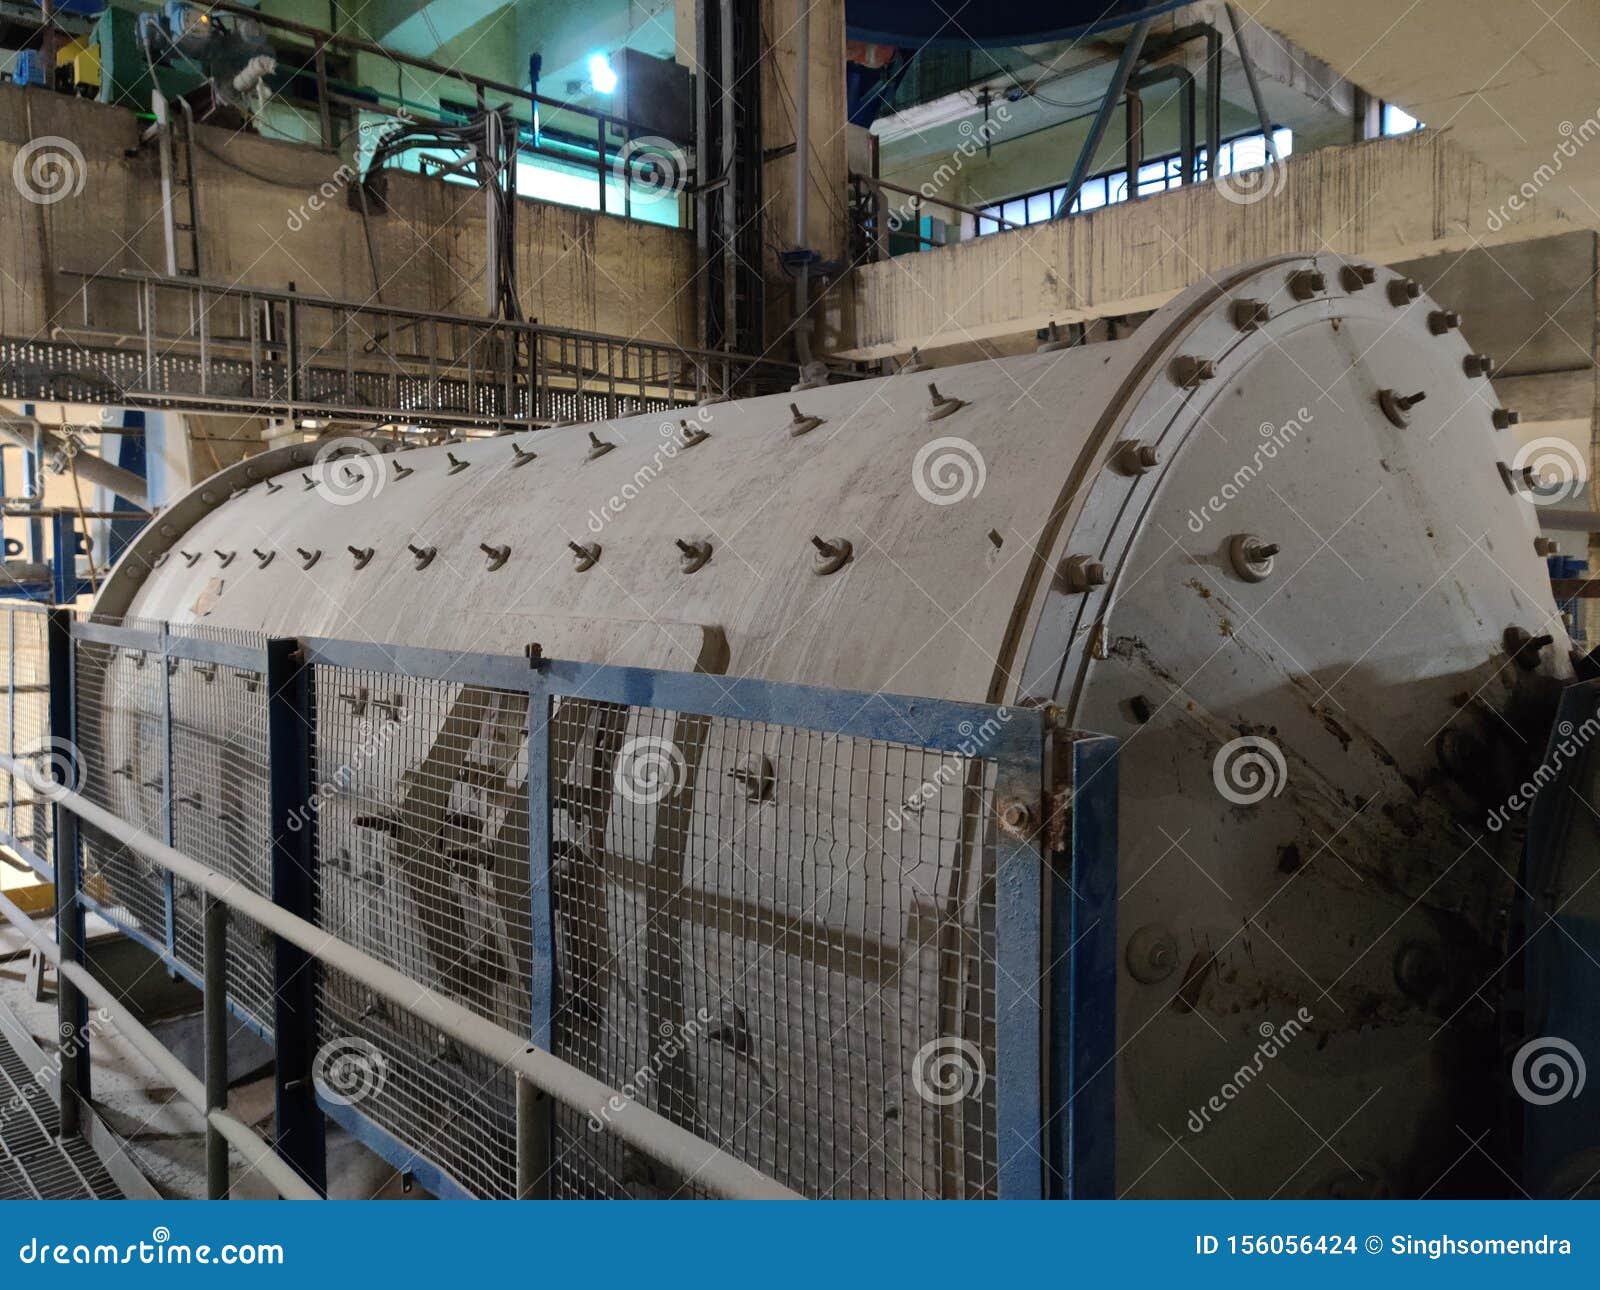 components of power plant: ball mill of fgd (flue gas desulfurization)